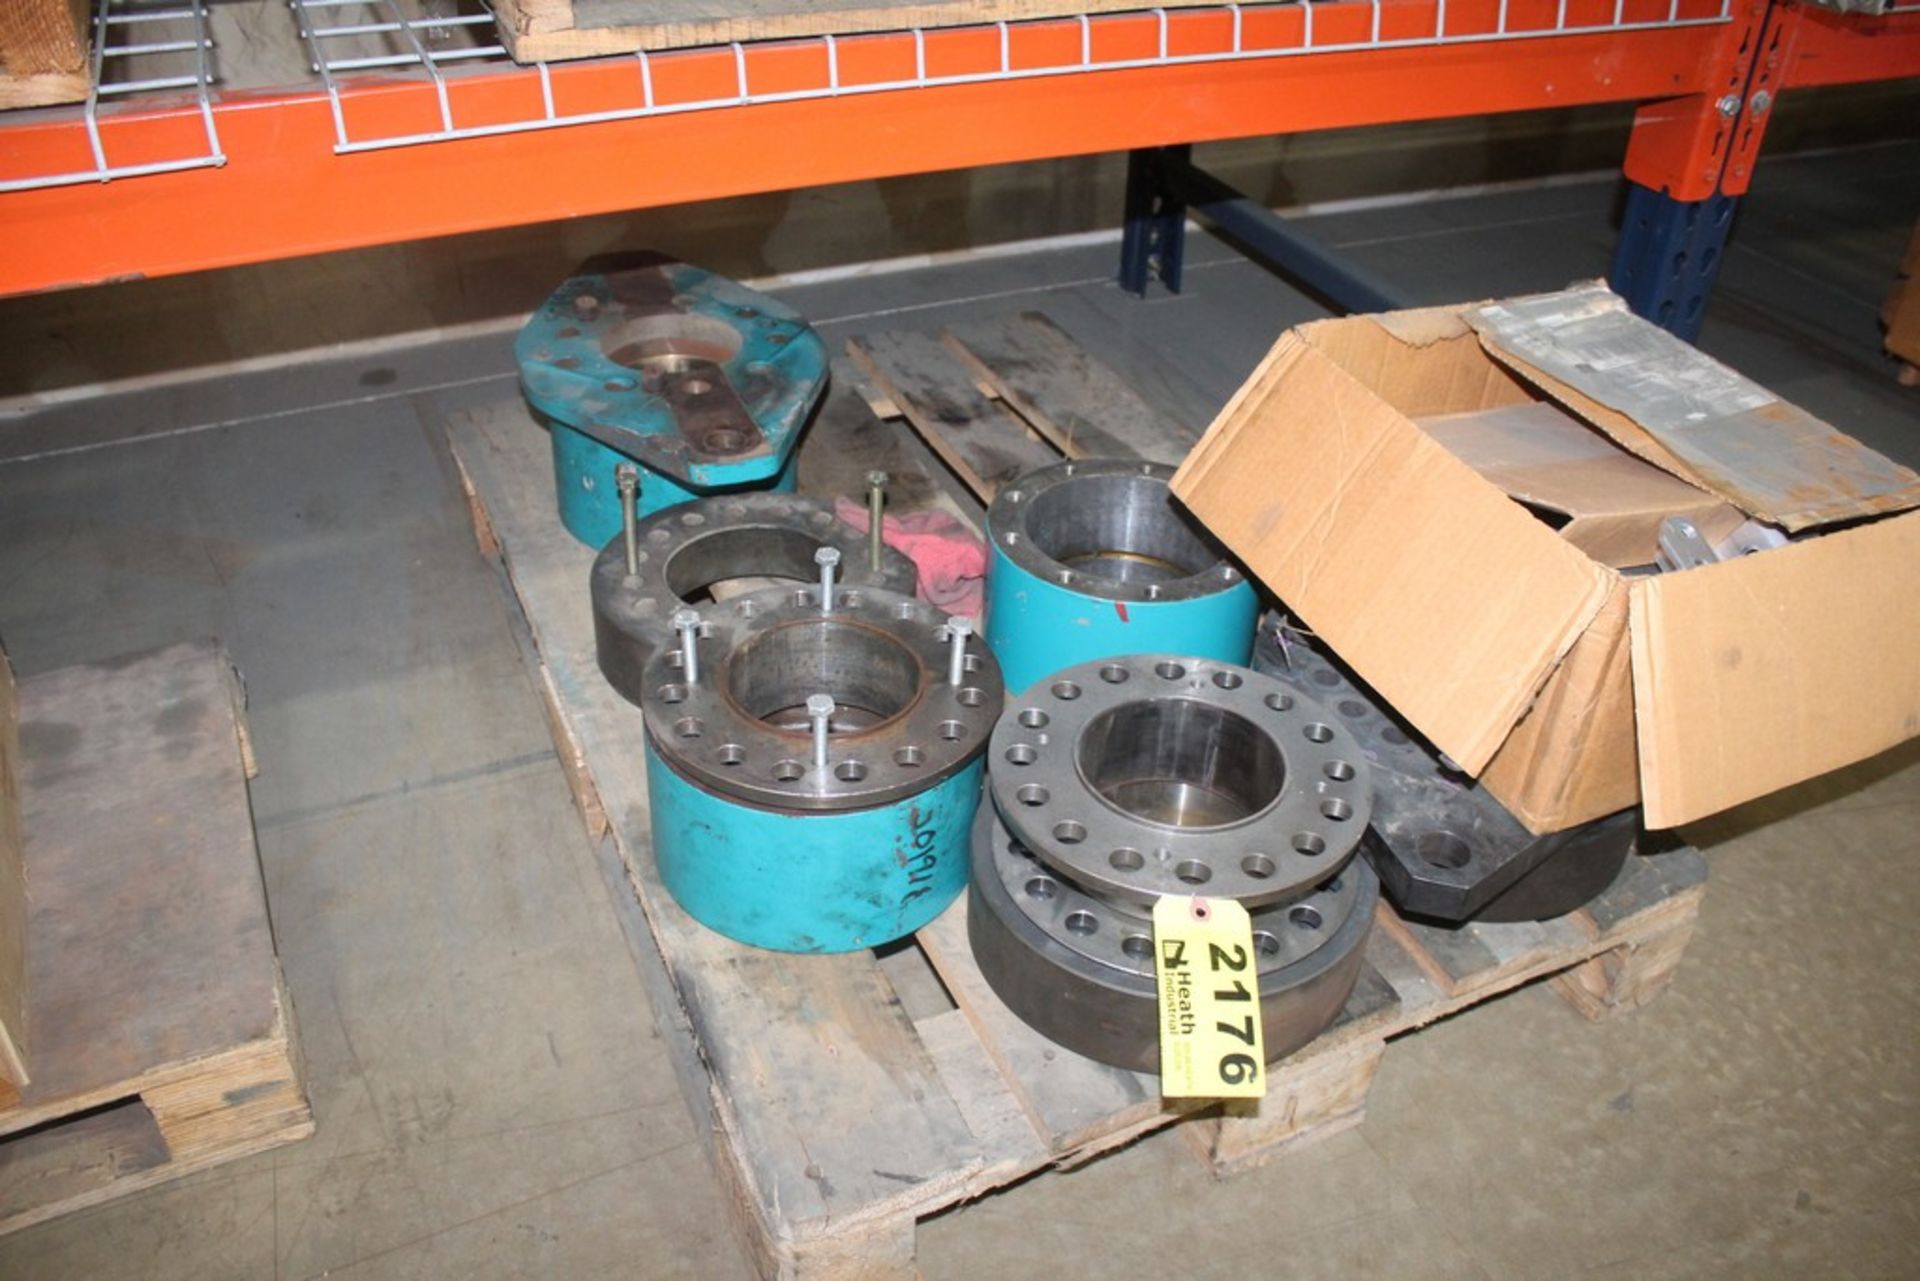 ASSORTED STEEL COUPLINGS ON PALLET AND PART ON ABOVE SHELF